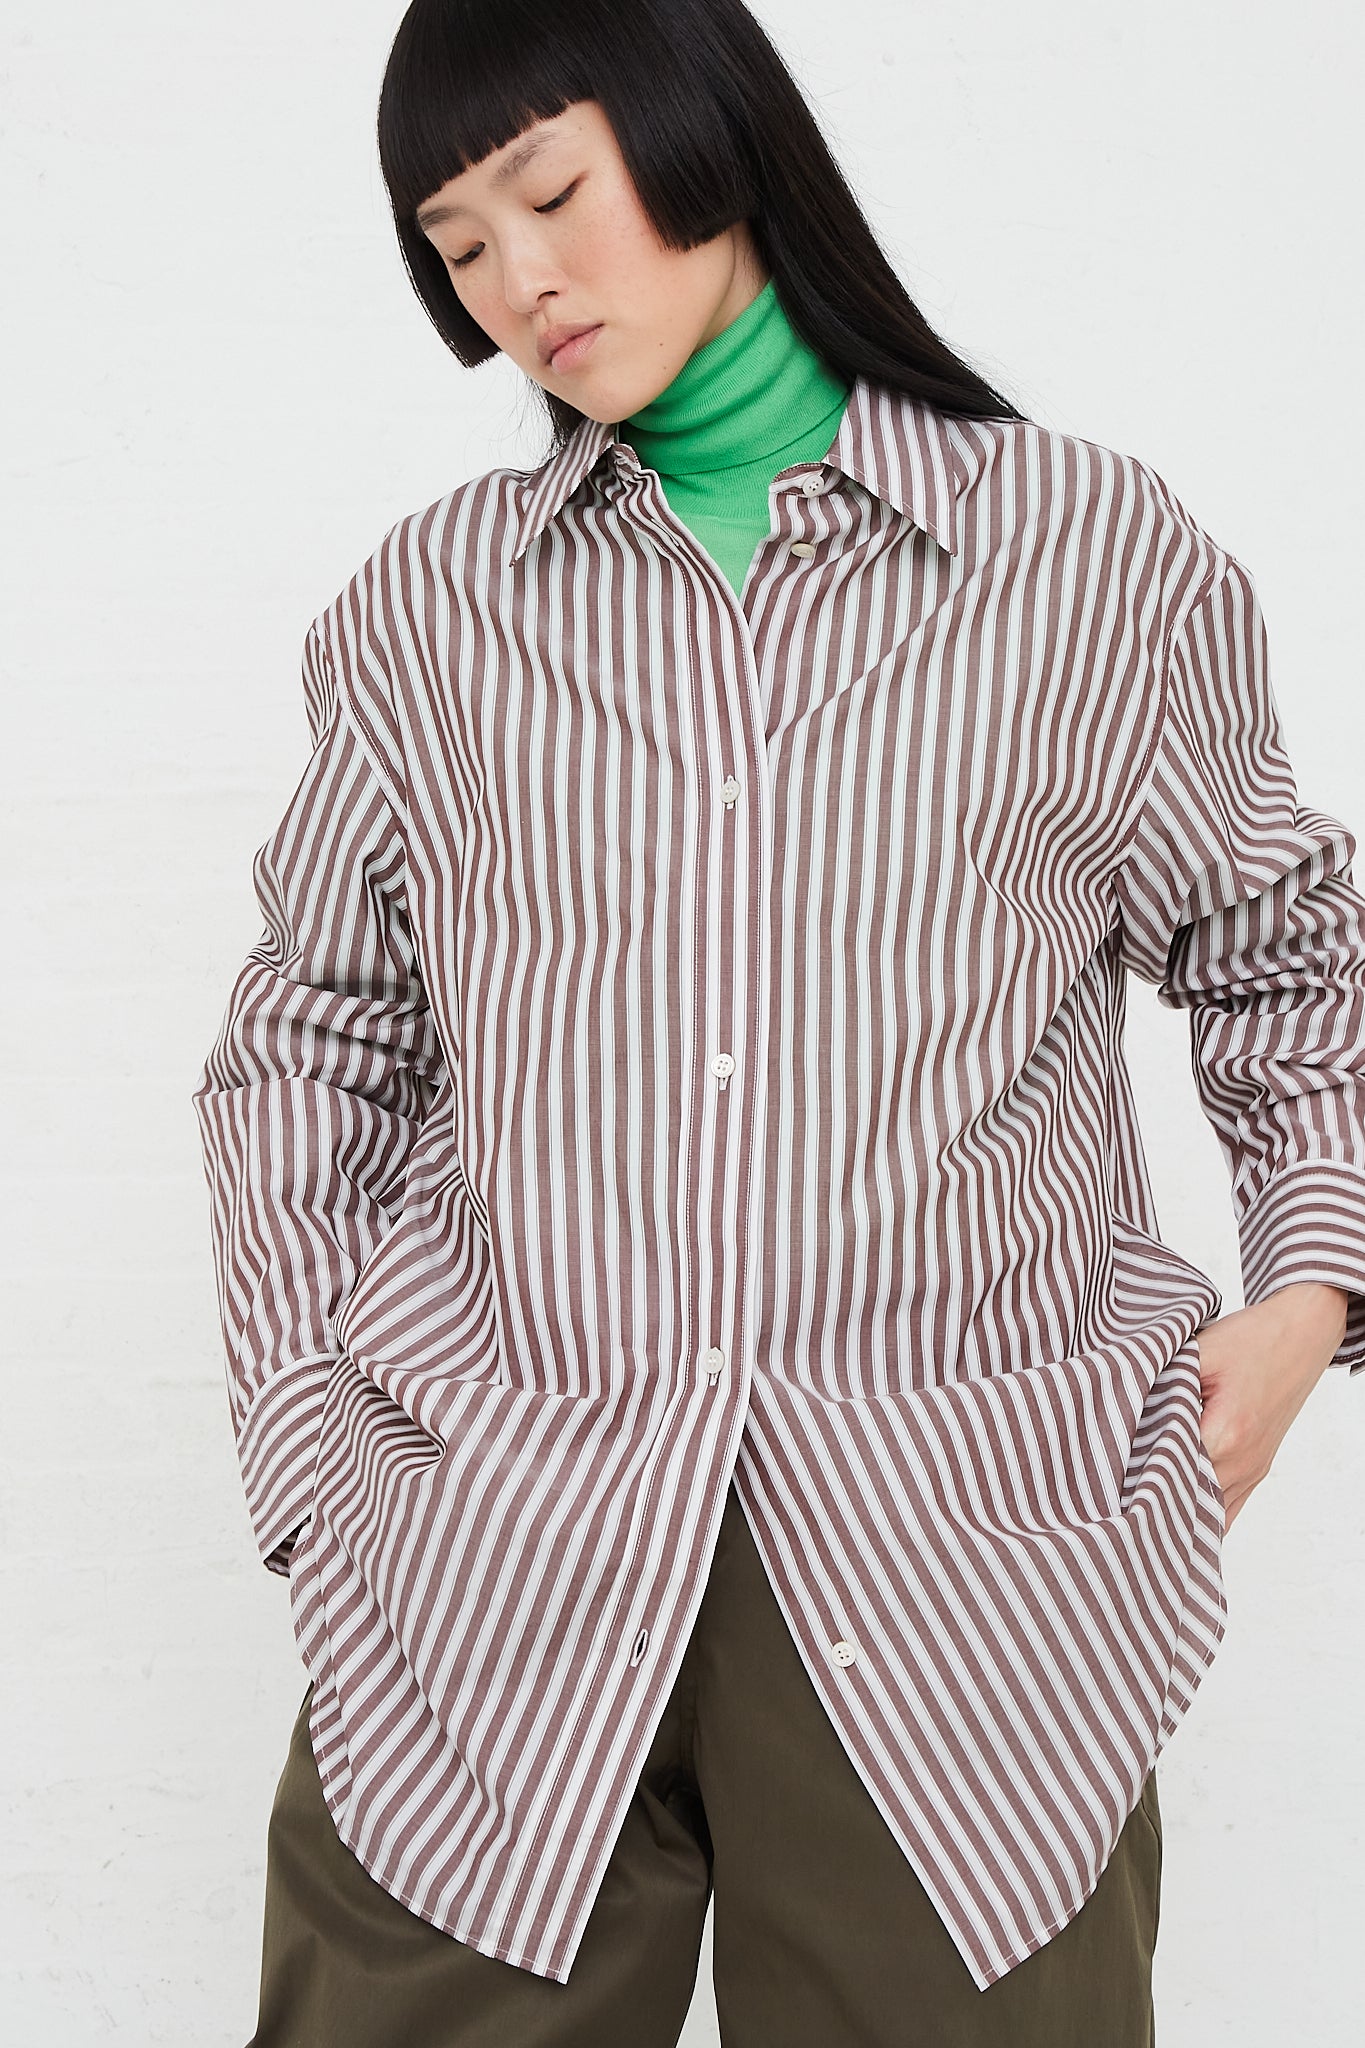 Santos Overshirt in Rosewood and White